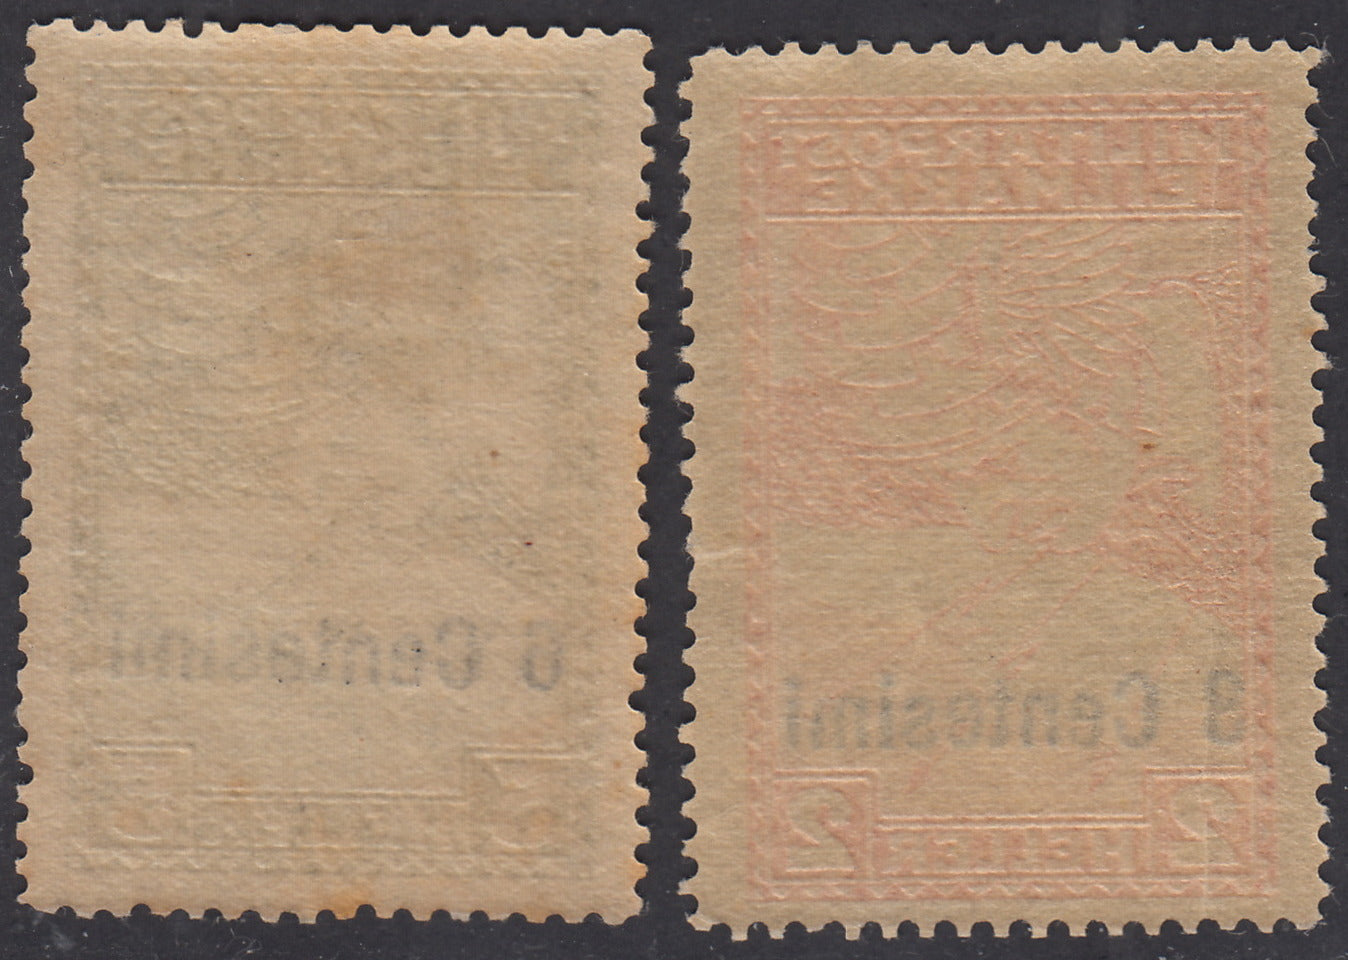 T56 - 1918 - Austrian occupation of Friuli and Veneto, Bosnian espressos overprinted "3 cents." red and "6 cent." olive green new with rubber (1, 2) 